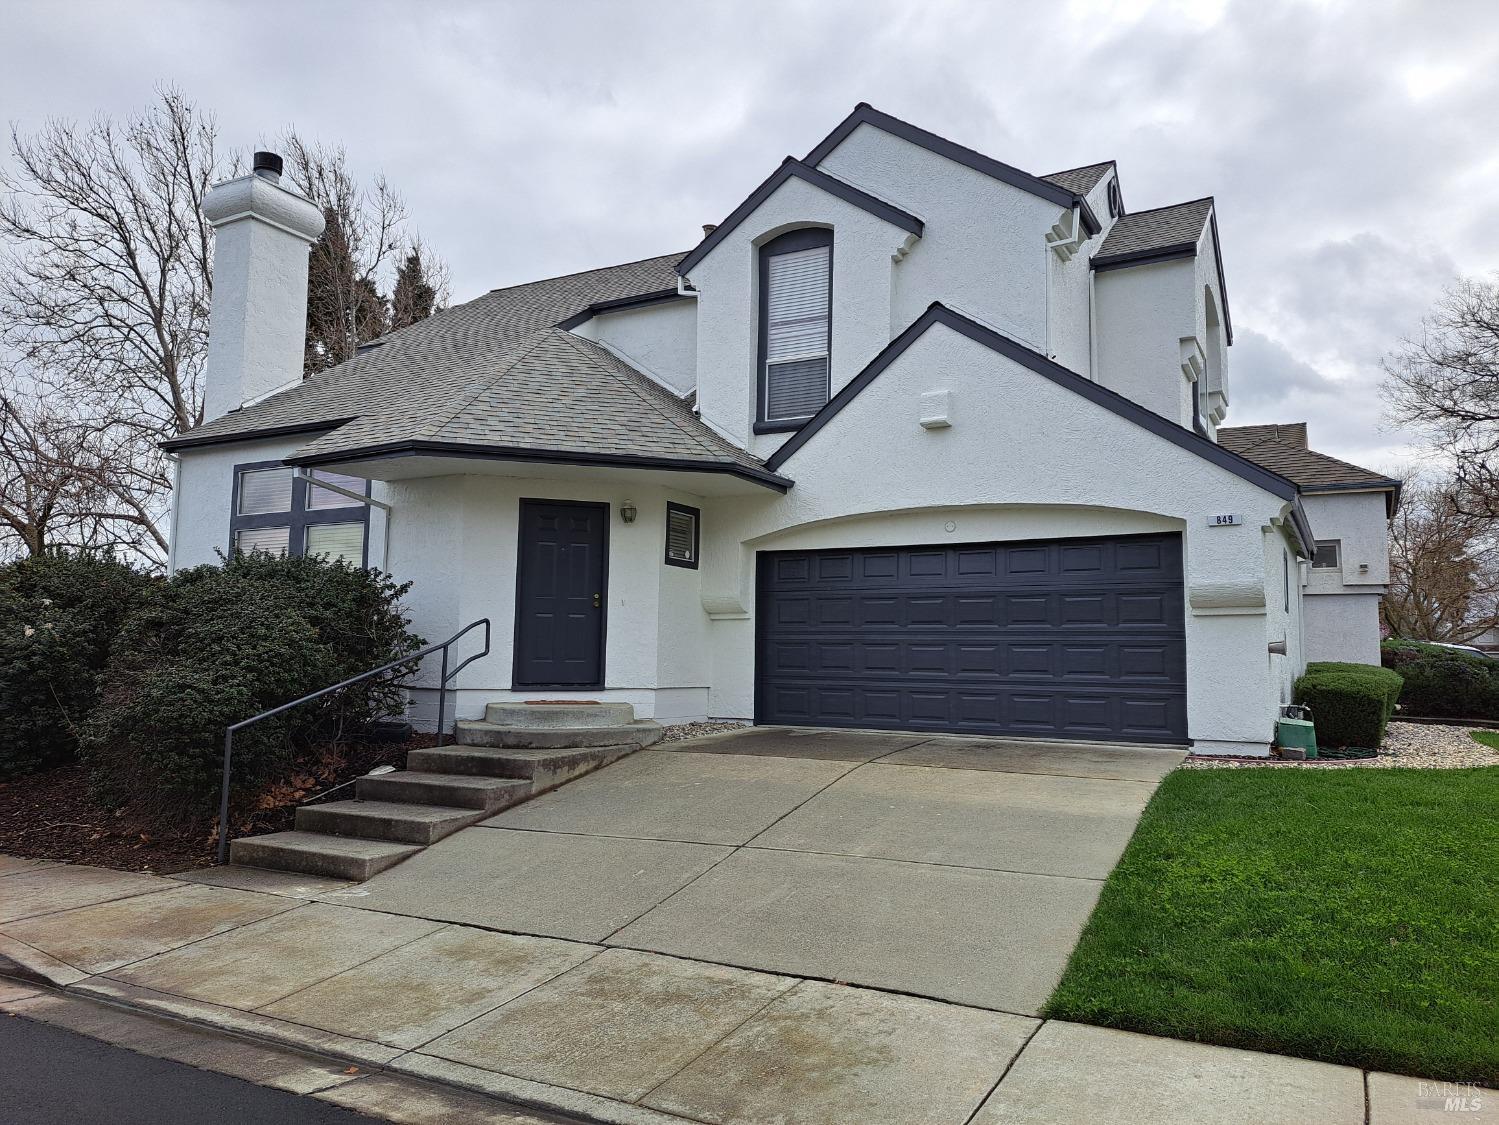 Photo of 849 Chateau Cir in Vacaville, CA